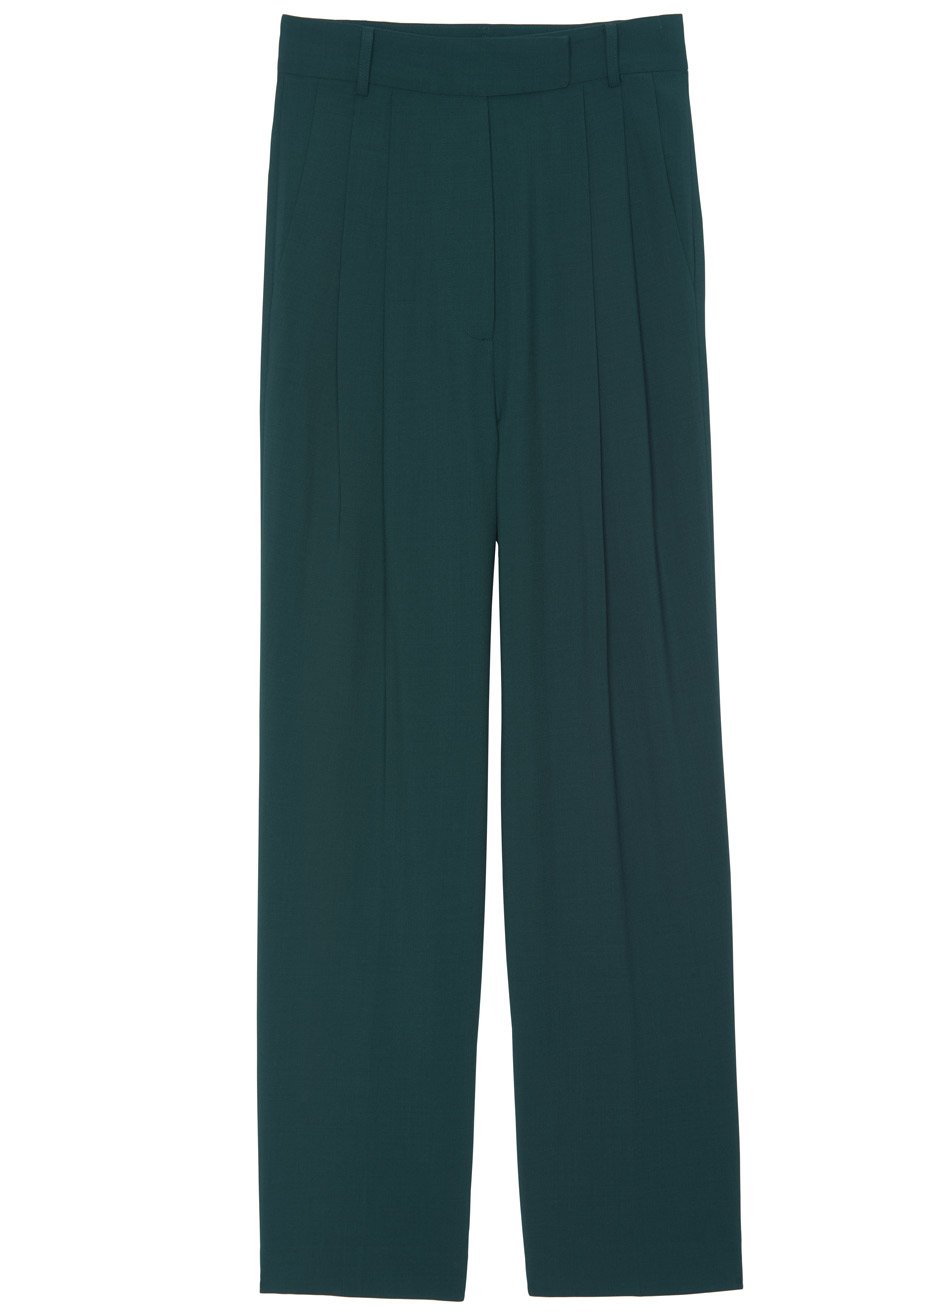 Bea Pleated Suit Pants - Forest Green - 6